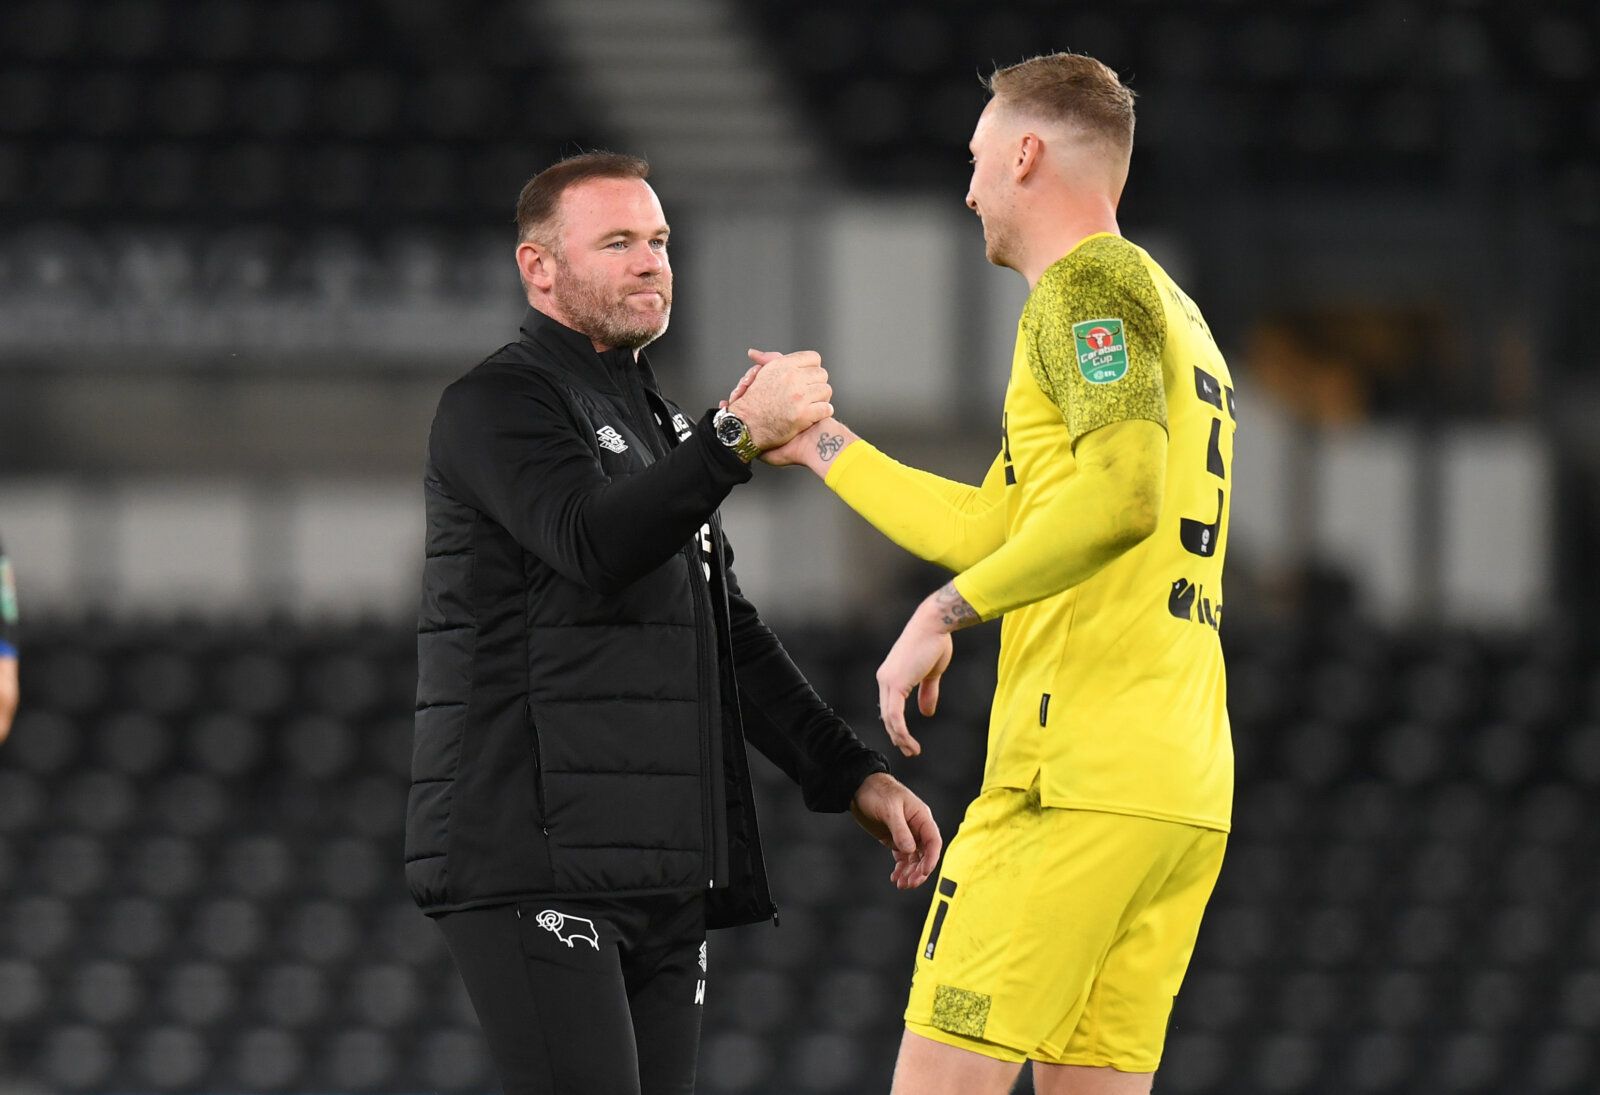 DERBY, ENGLAND - AUGUST 10: Derby County Manager Wayne Rooney congratulates Ryan Allsop of Derby County after his team won the penalty shoot out during the Carabao Cup First Round match between Derby County and Salford City FC at Pride Park Stadium on August 10, 2021 in Derby, England. (Photo by Tony Marshall/Getty Images)